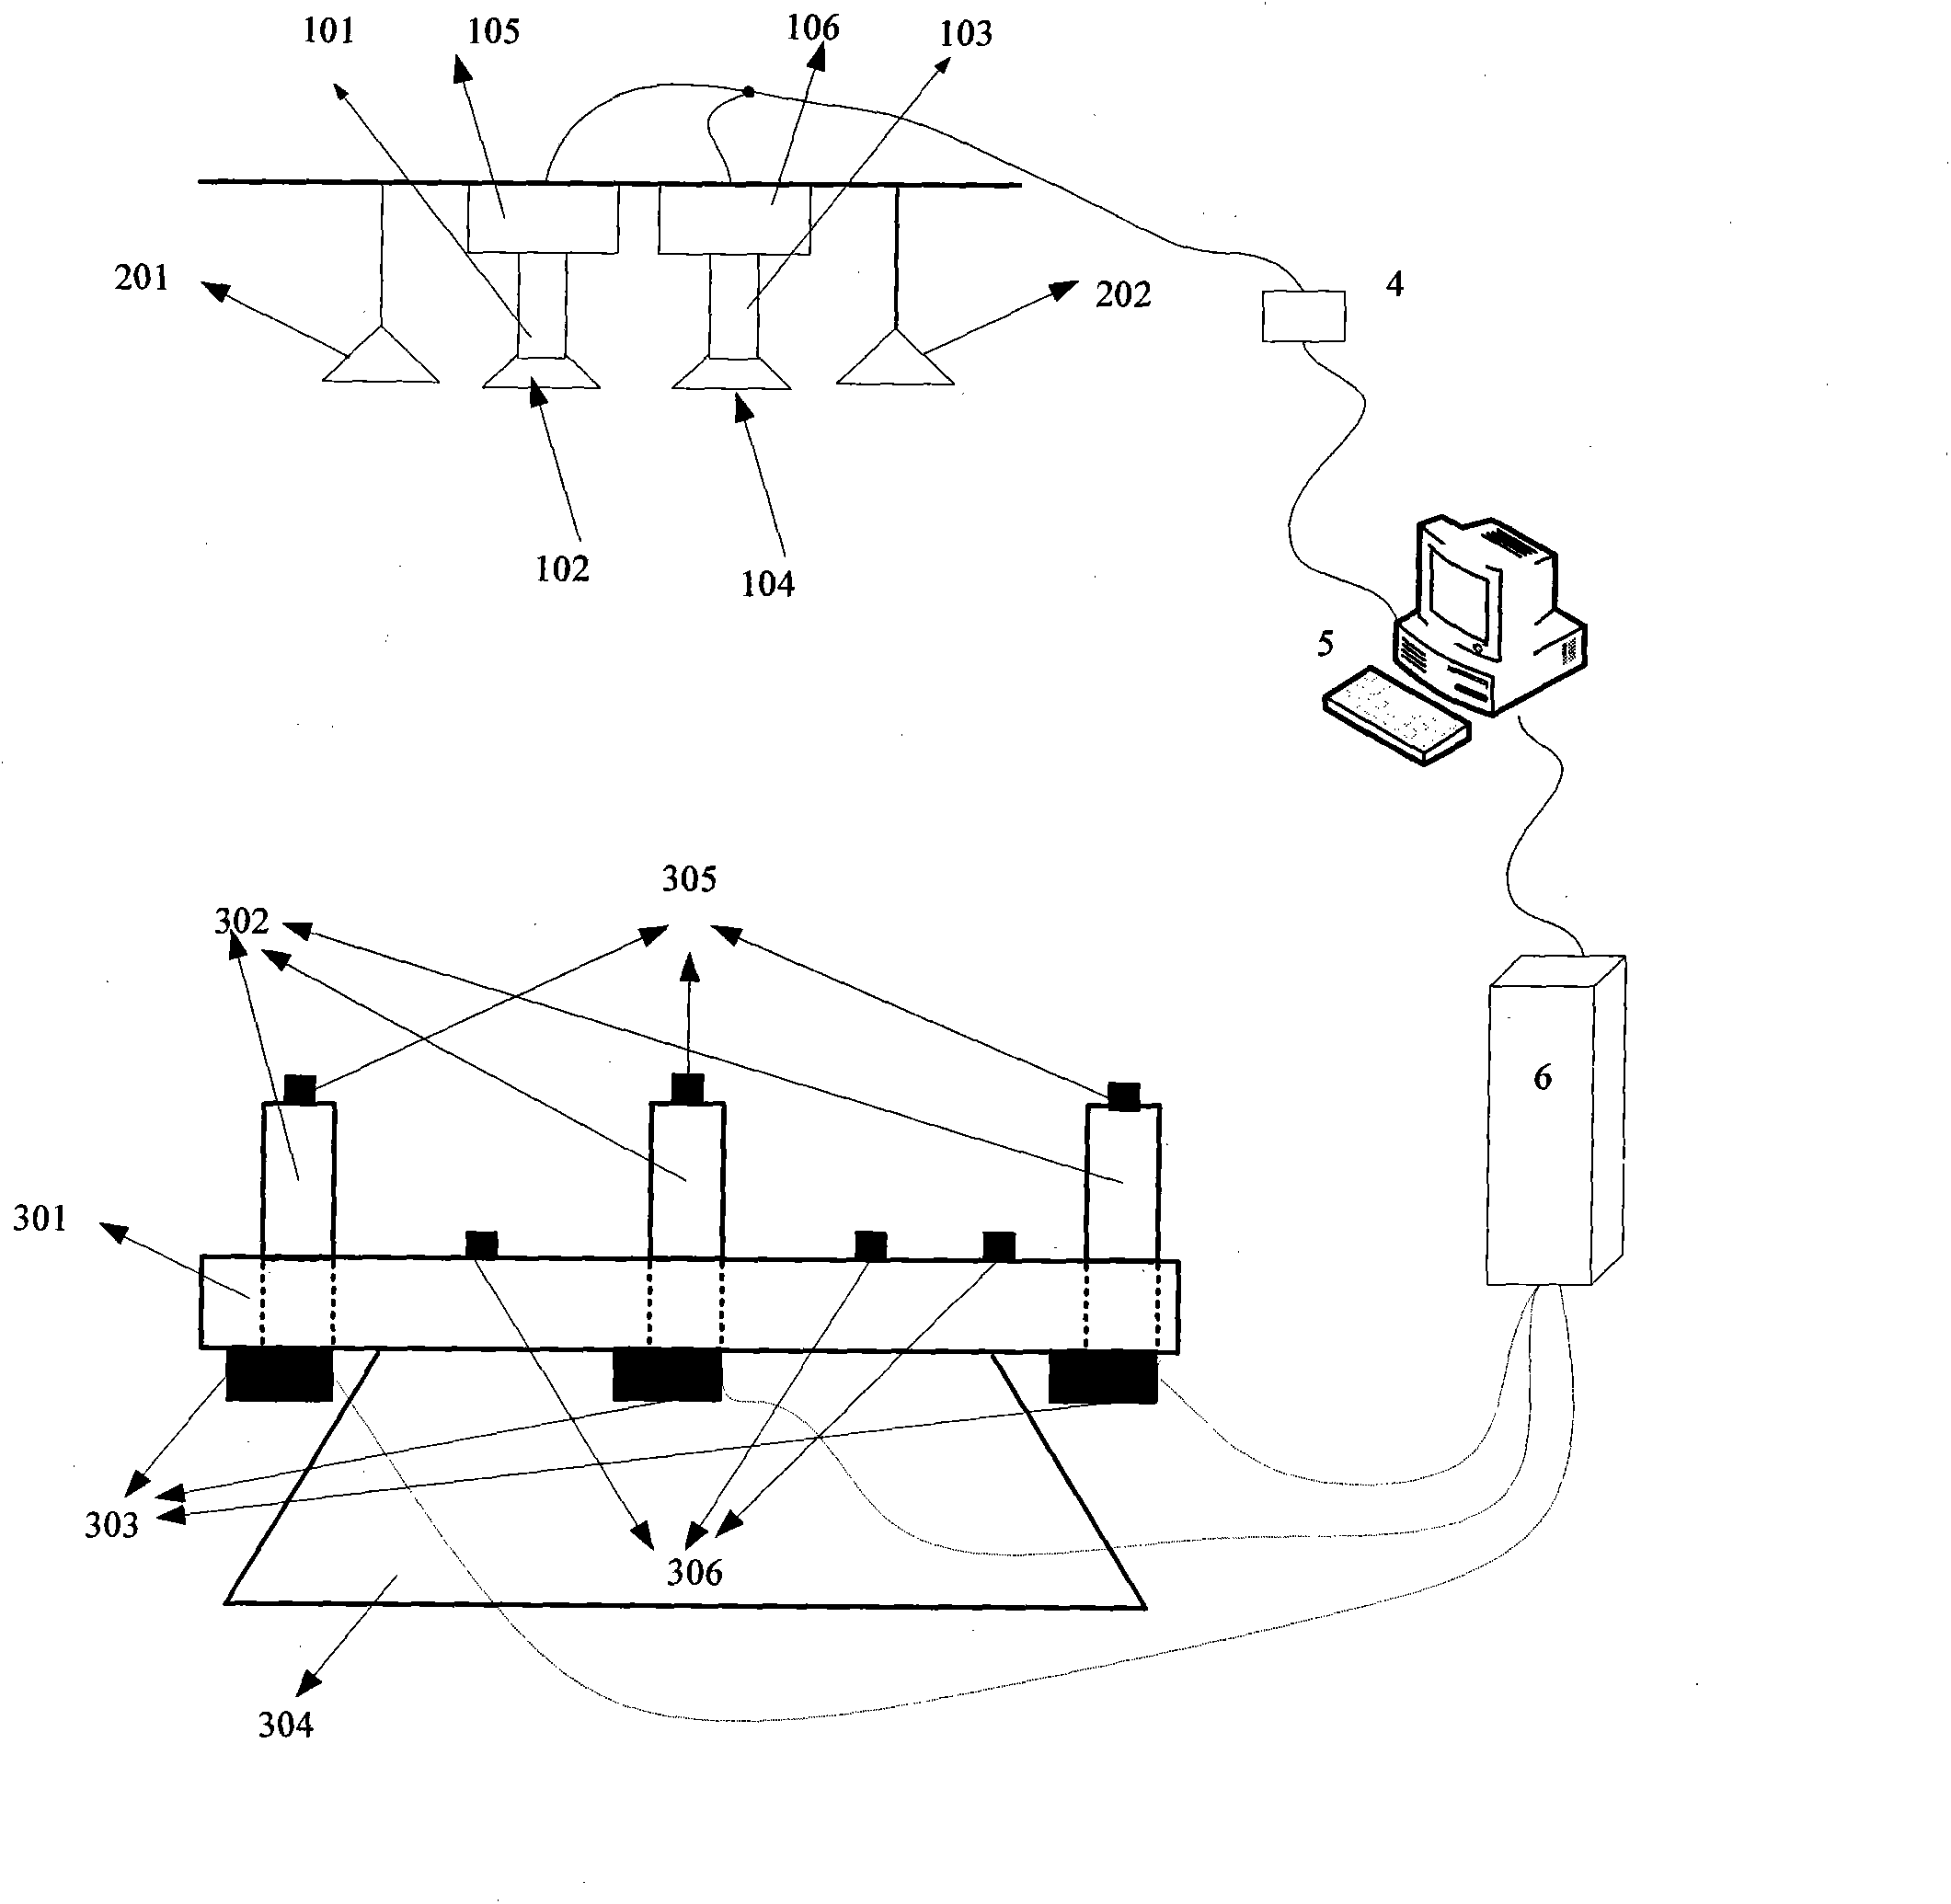 Binocular vision-based synchronous operation lifting system detection system and method